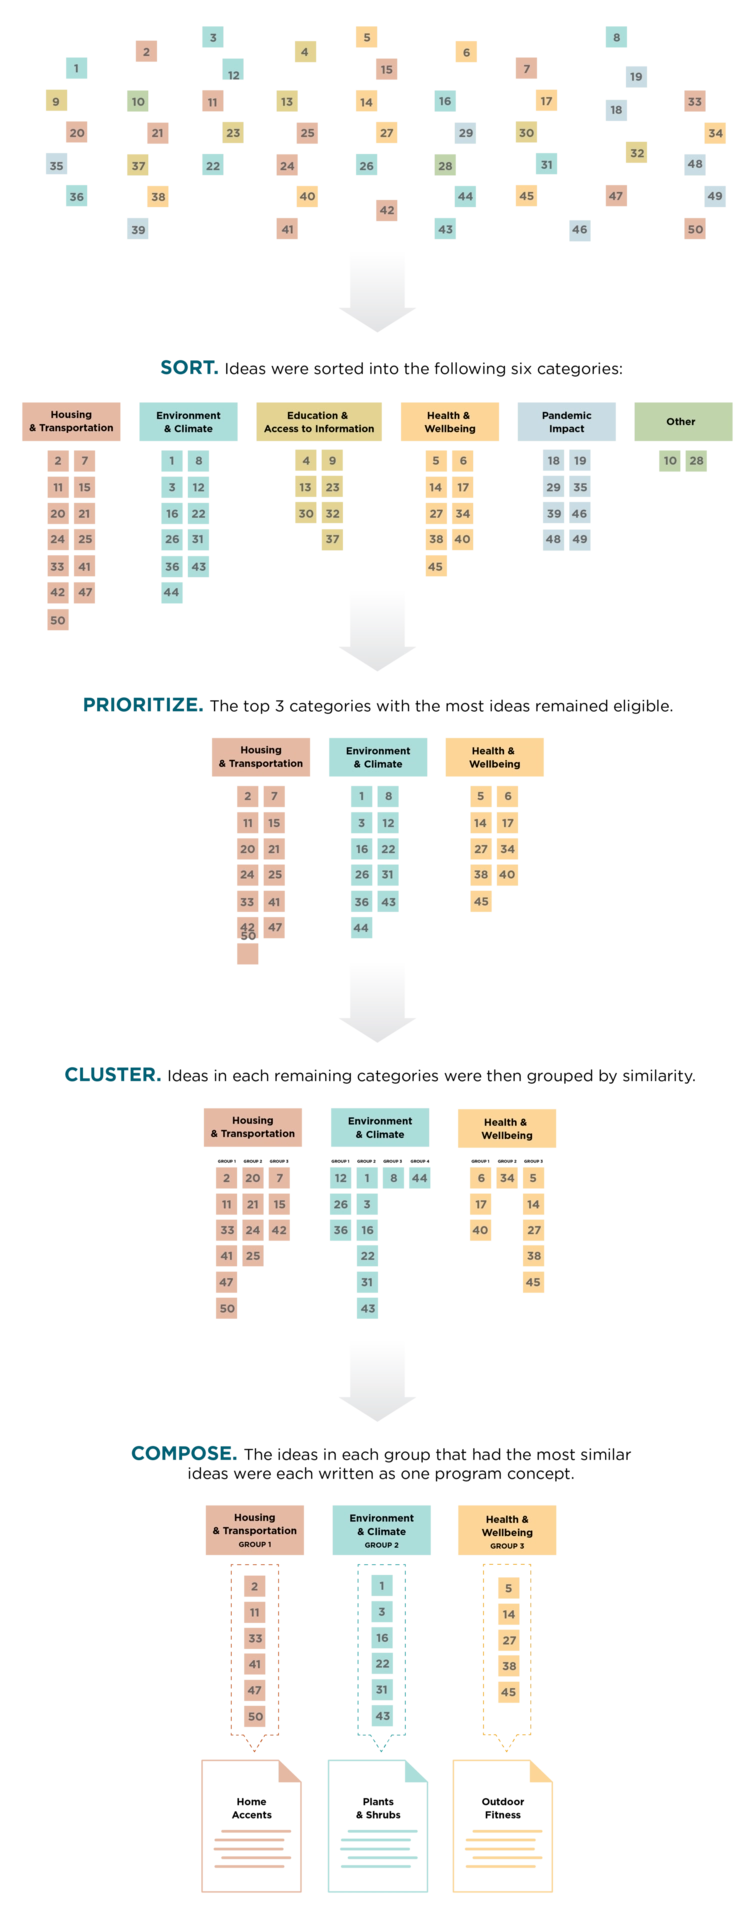 A flow chart graphic indicating how ideas were sorted, prioritized, clustered, and finally composed into the program concepts.